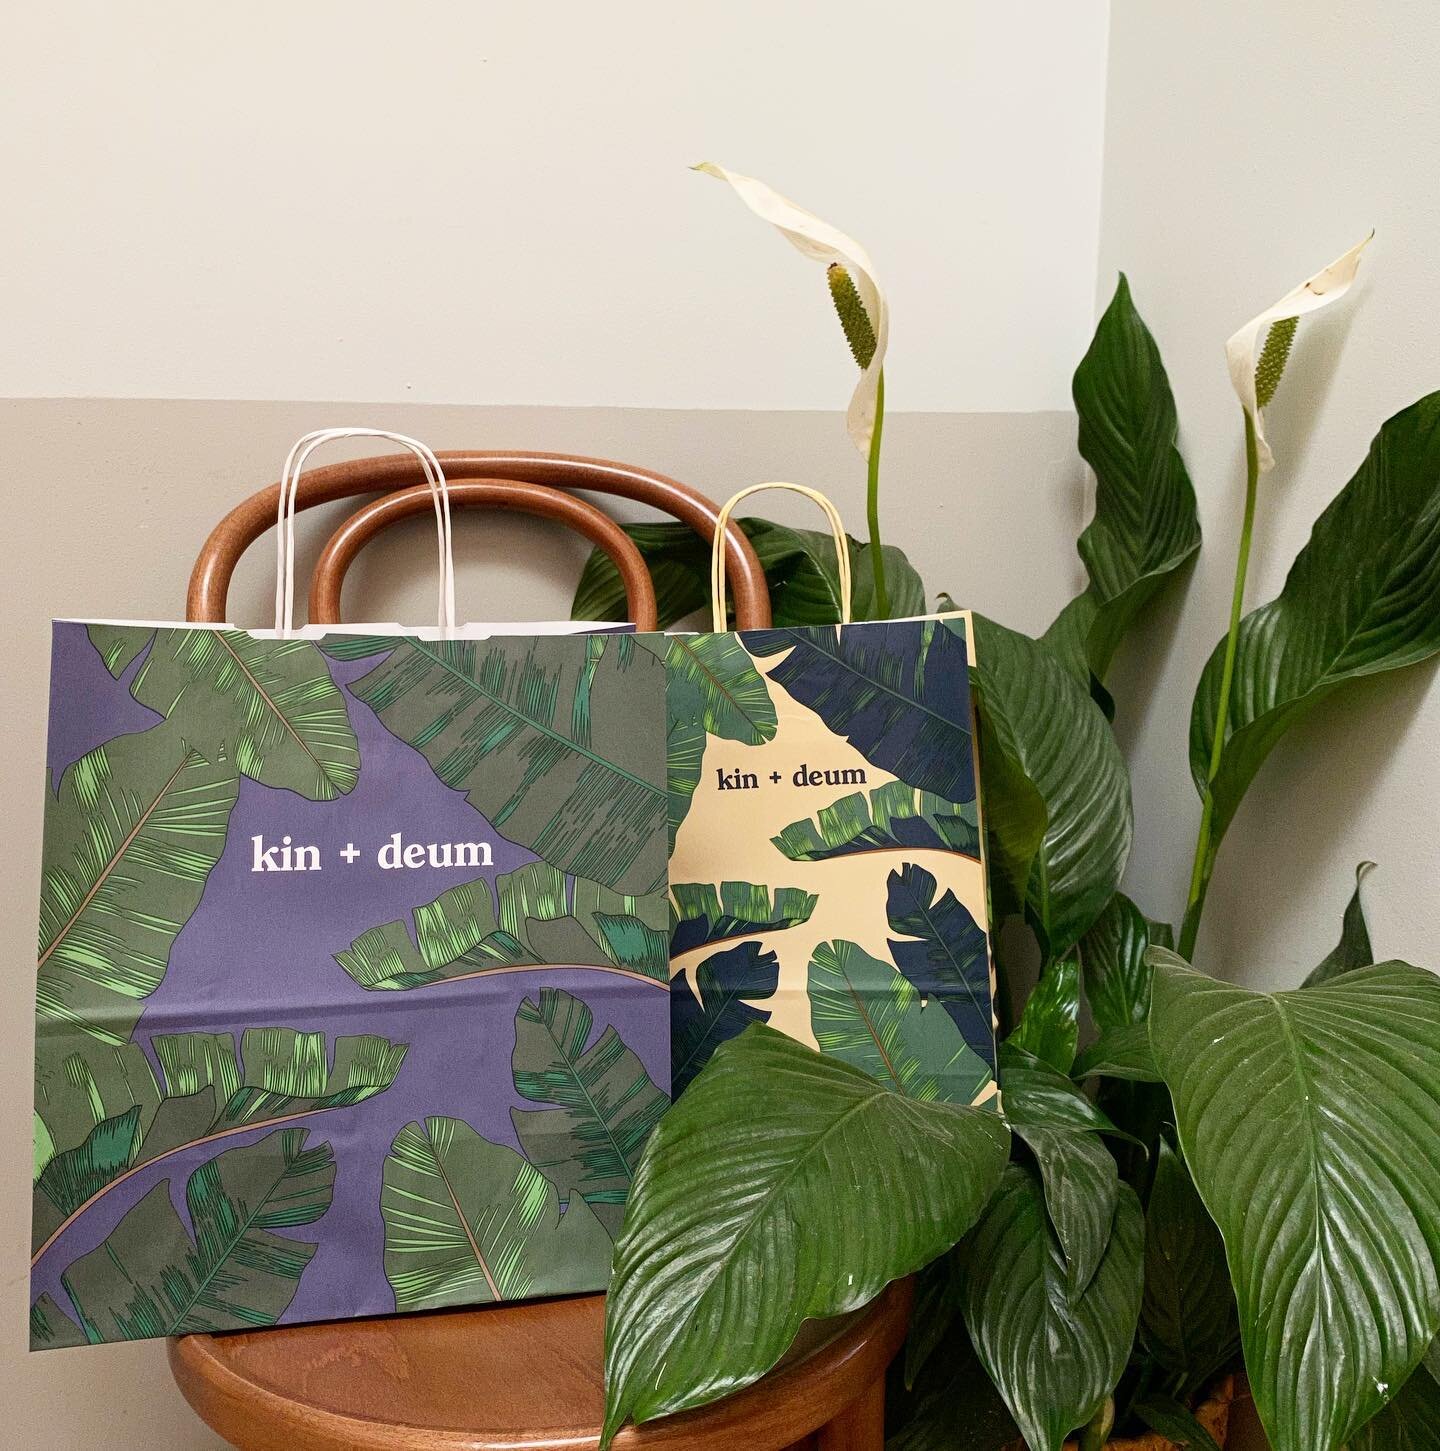 Sustainable, recyclable and reusable bags. Open daily for your fresh wholesome takeaway 🌿 💼 ♻️ 

https://www.kindeum.com/
.
.
.
.
.
#architecture #art #artisan #plants #takeawat #healthyeating #thairestaurant #londonrestaurants #ootd #instafood #de